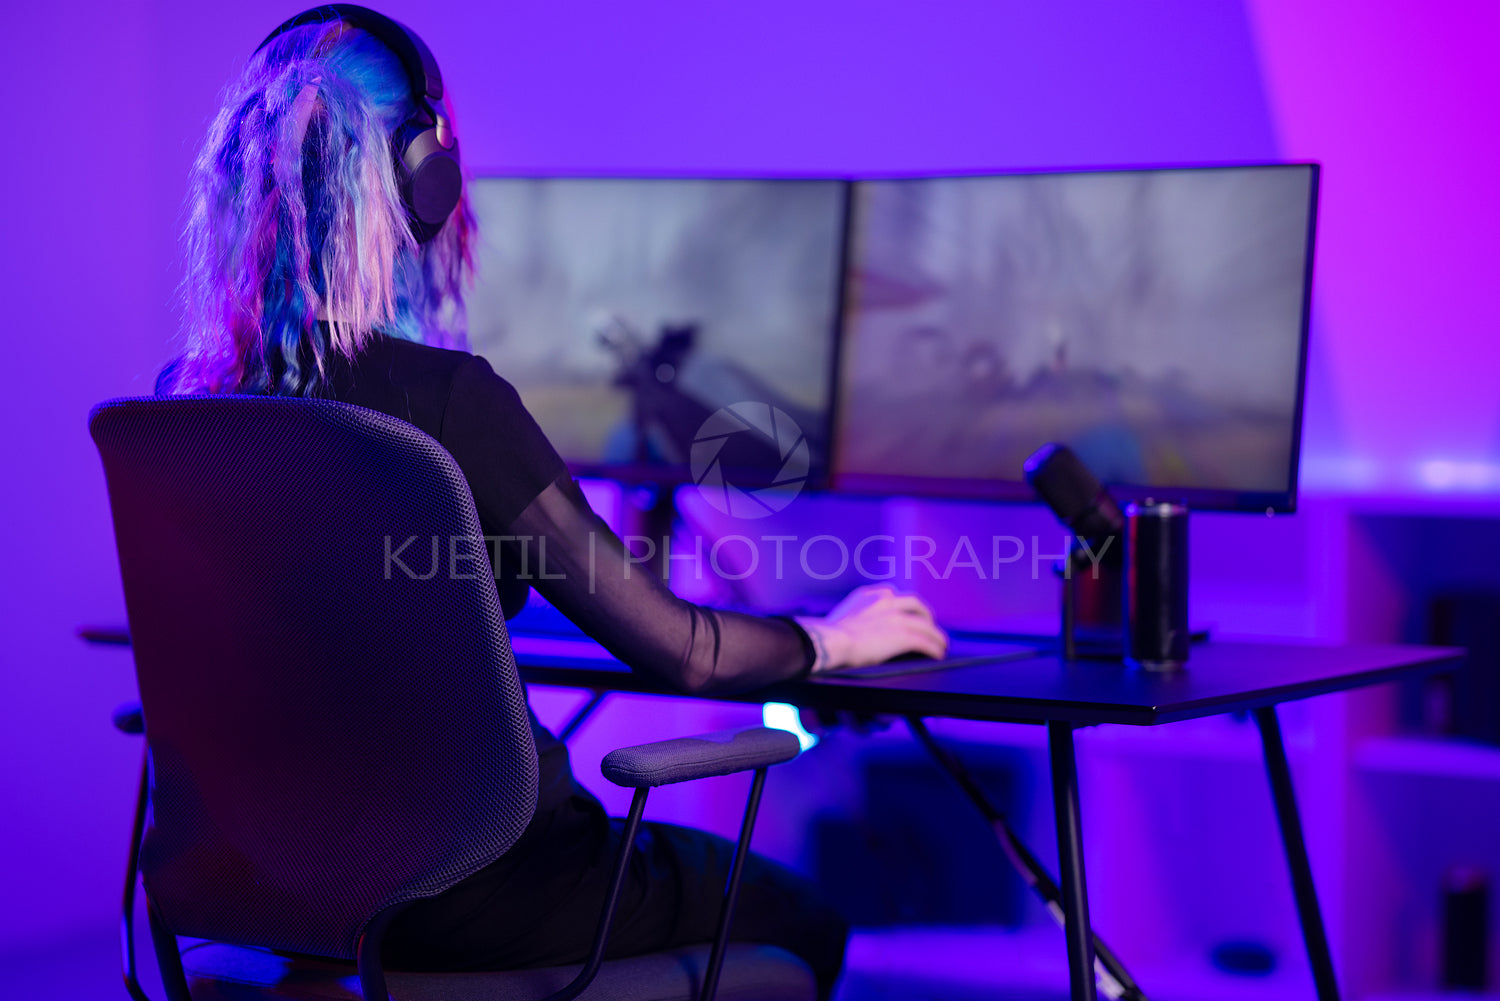 E-sport gamer girl plays first-person shooter online video game on PC